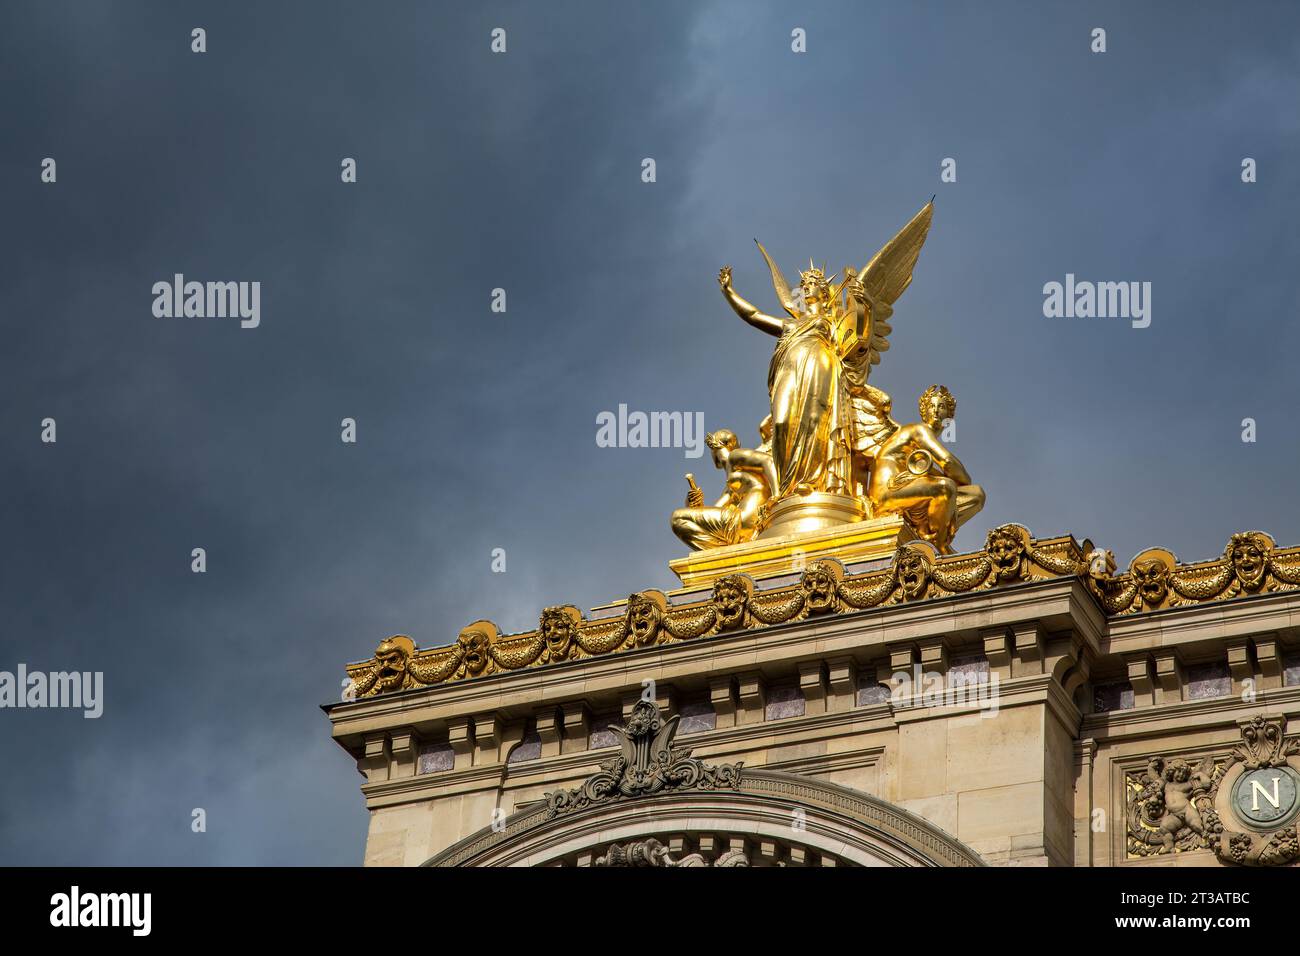 Paris, France - 2 March 2015: The golden statue of Harmony on the roof of the Opera Garnier, or Paris Opera House. Sculpted by Charles Gumery in 1869. Stock Photo